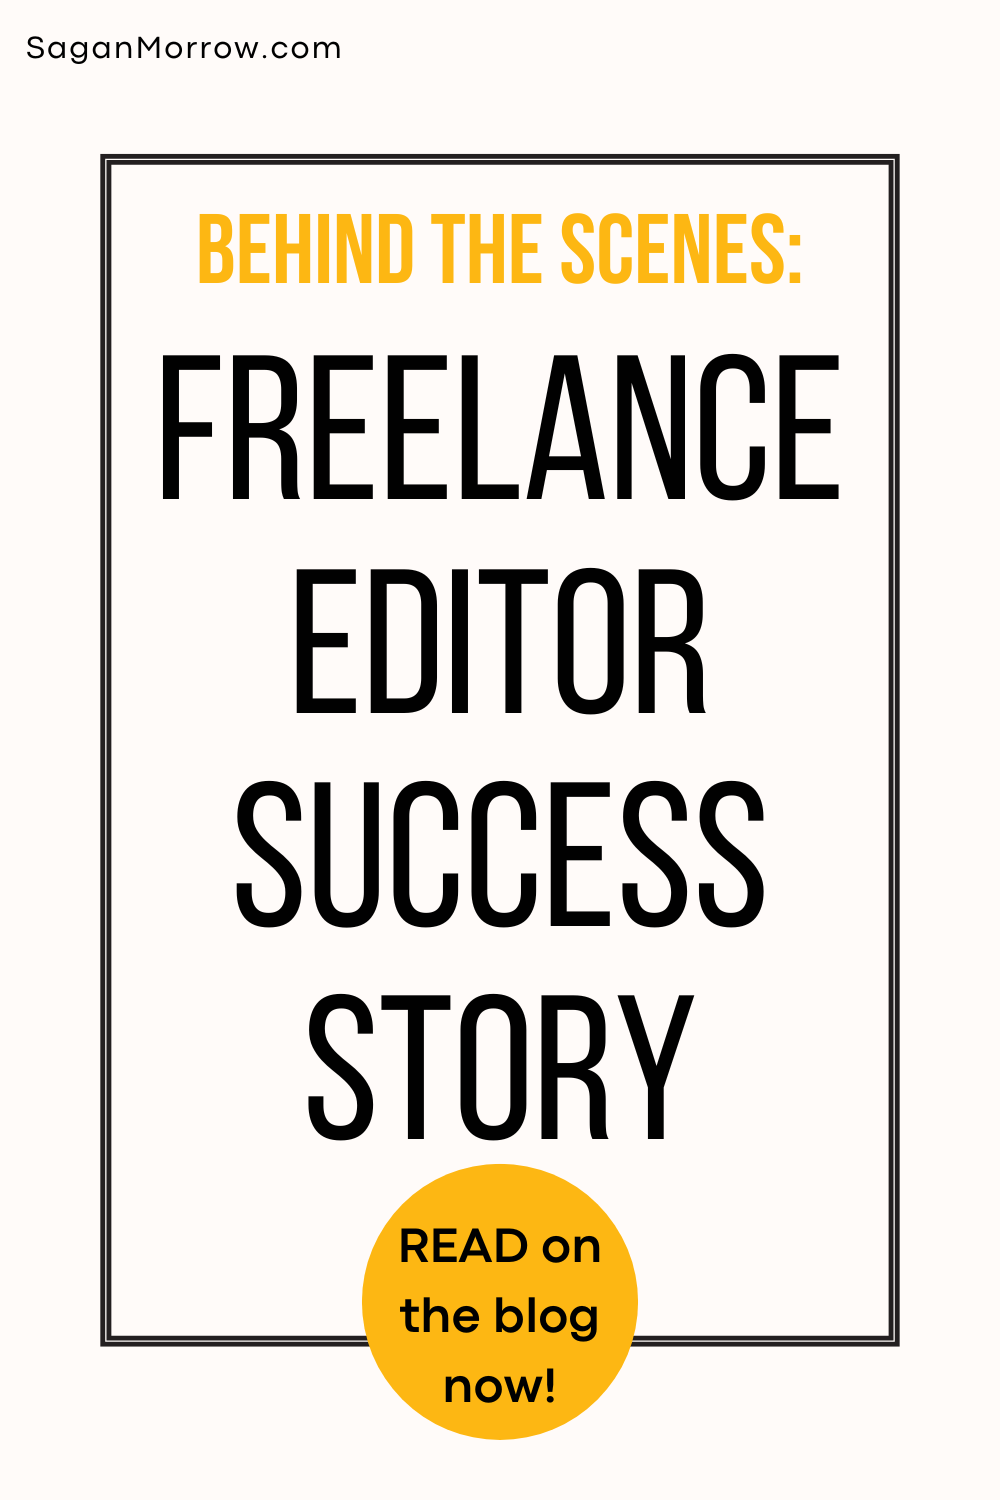 Behind the scenes - freelance editor success story - small business coach case study